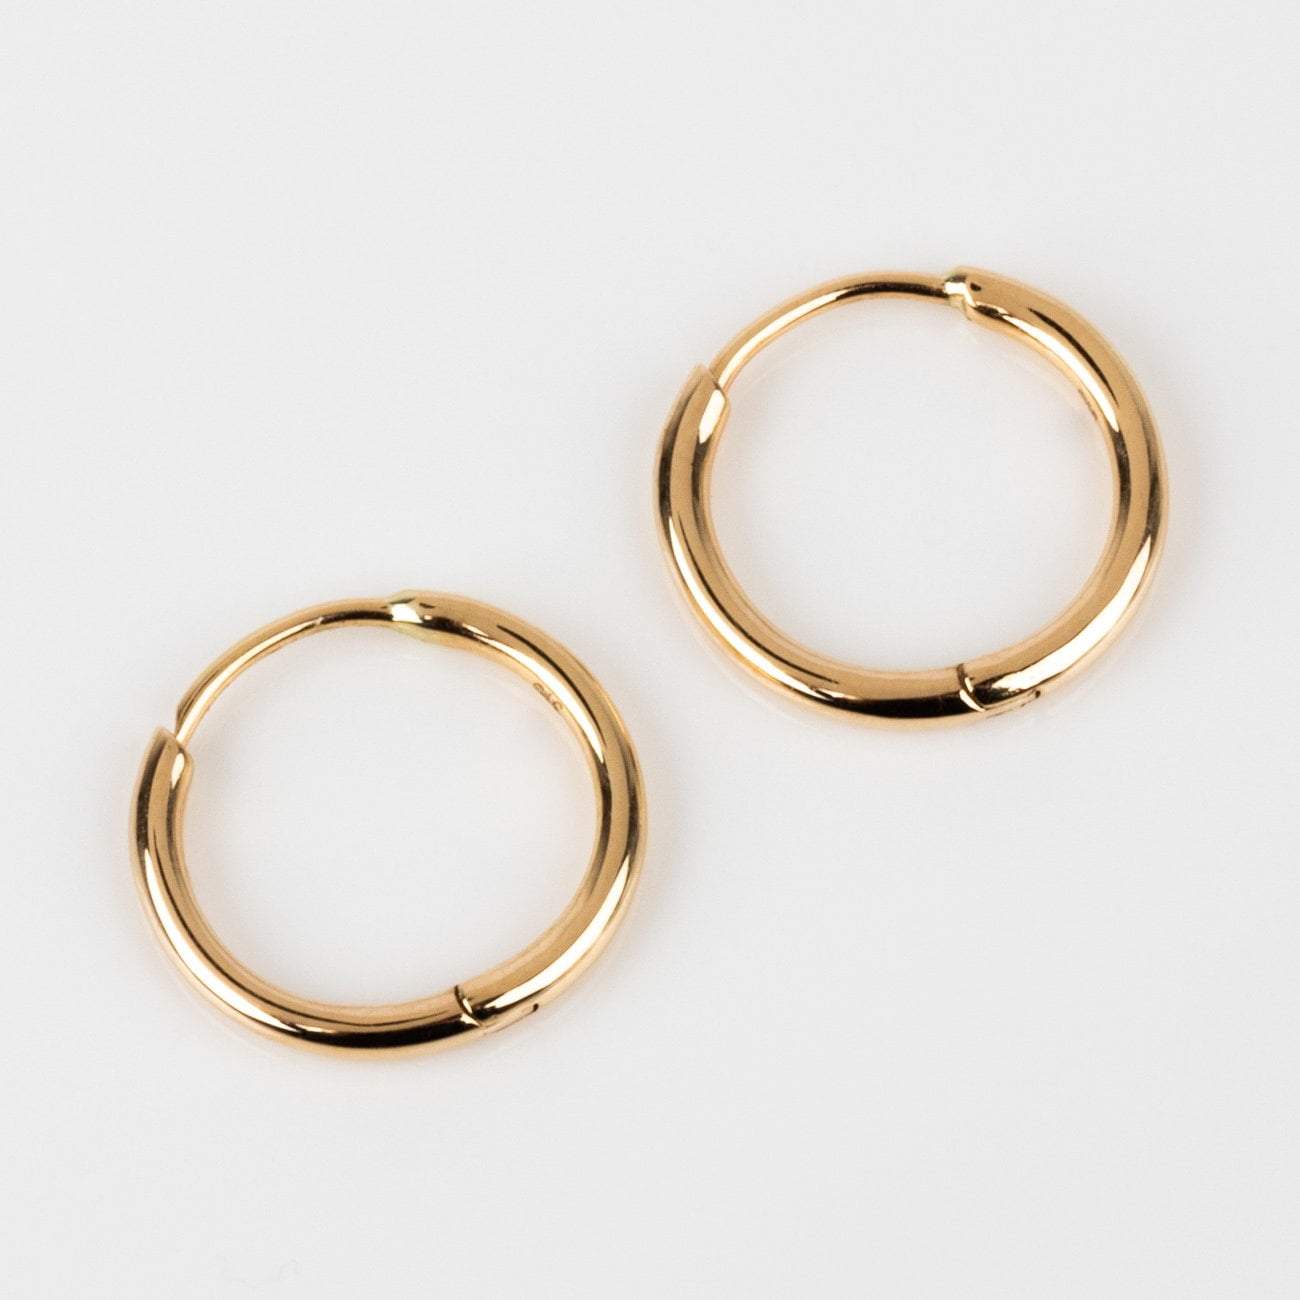 Solid Yellow Gold Mini Modern Hoop Earrings Family Gold